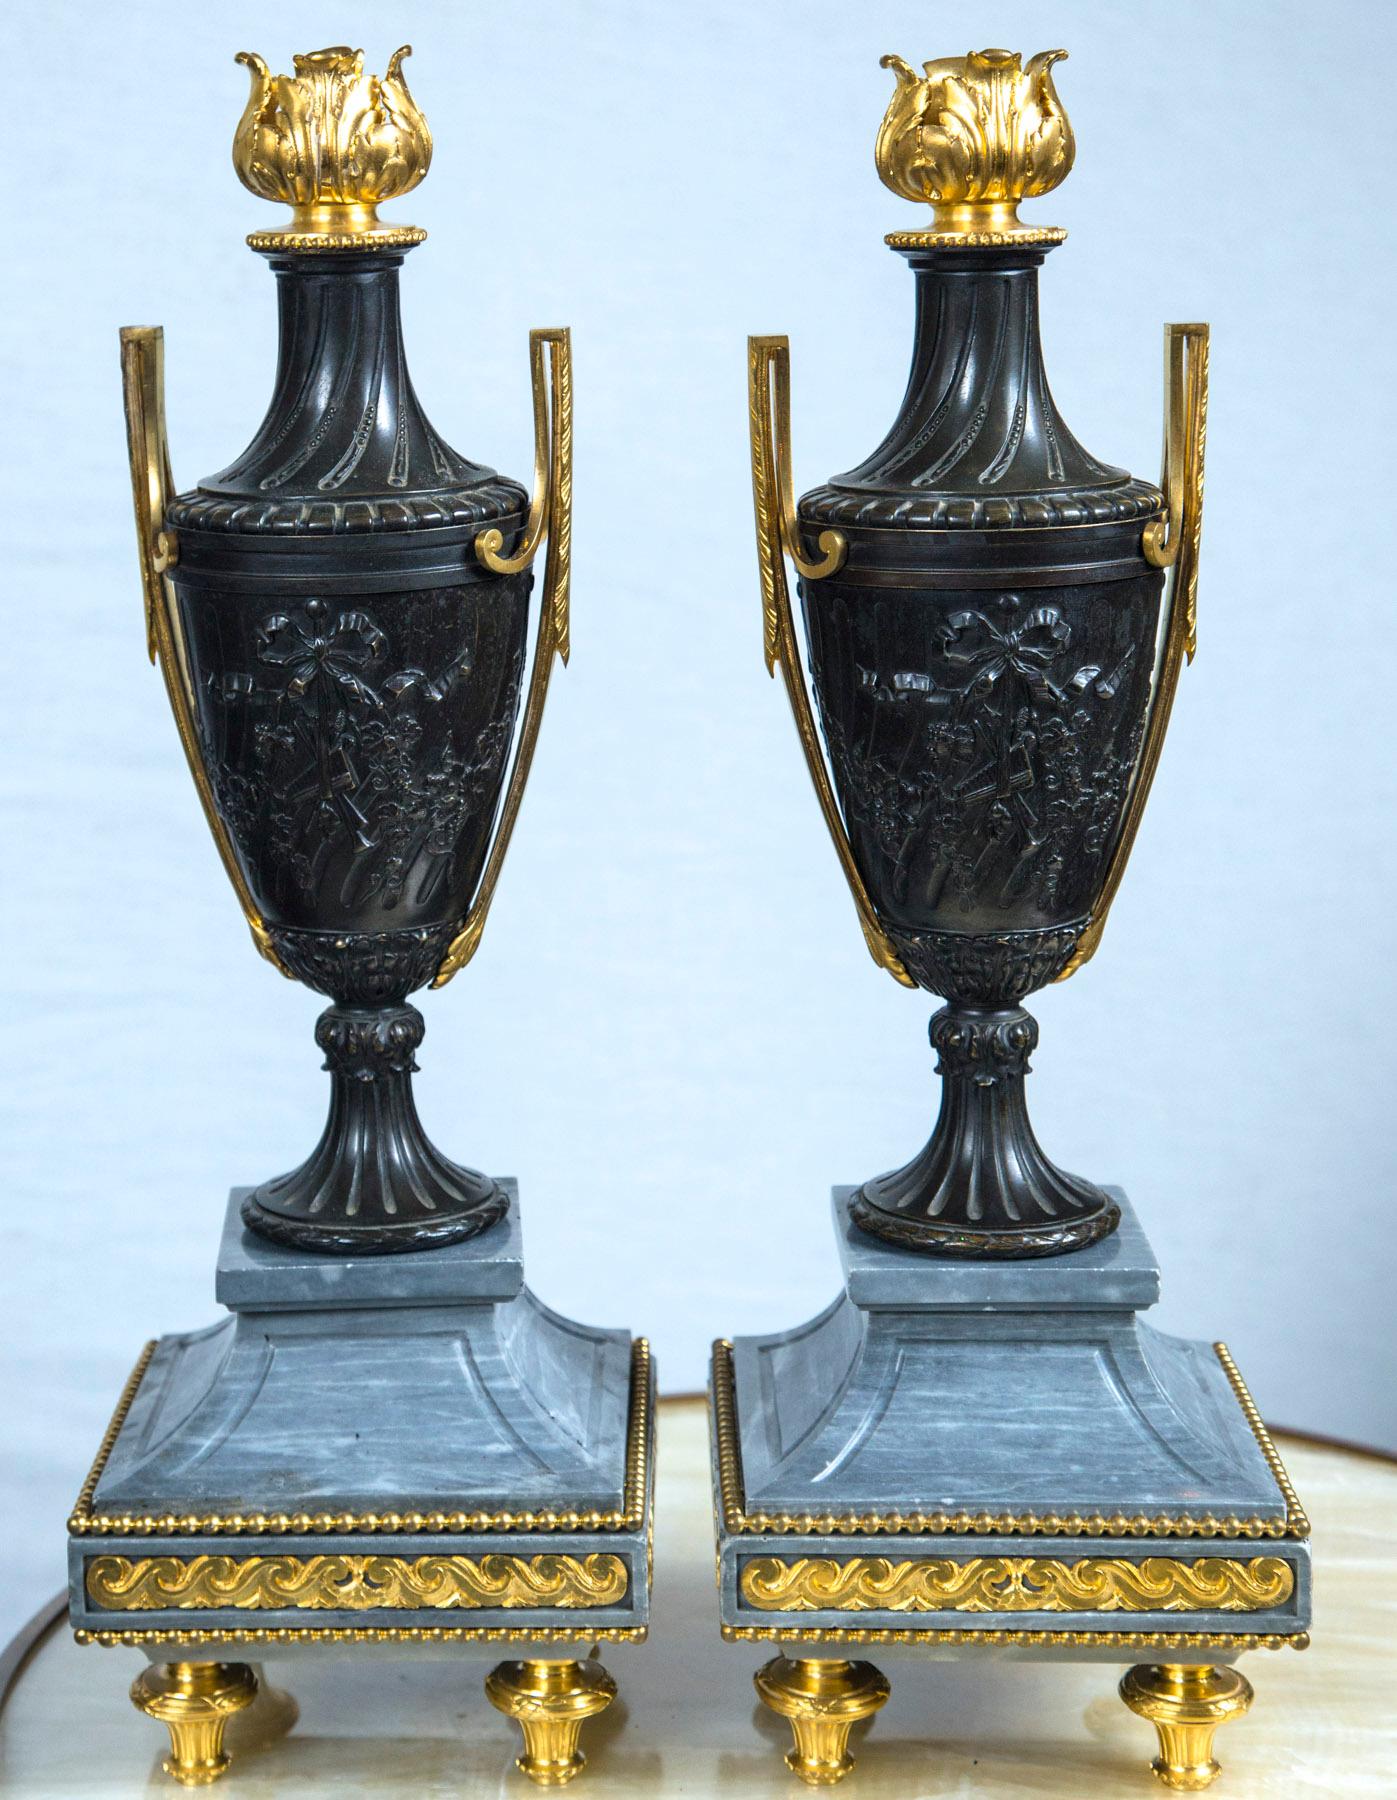 Raised on gilt bronze toupee feet. Gilt decoration on 3 sides of the grey marble bases Gilt bronze handles. Gilt bronze floral finial. The patinated bronze decorated in relief with bow topped trophies on each side. The bases measure 6.5 x 6.5. The